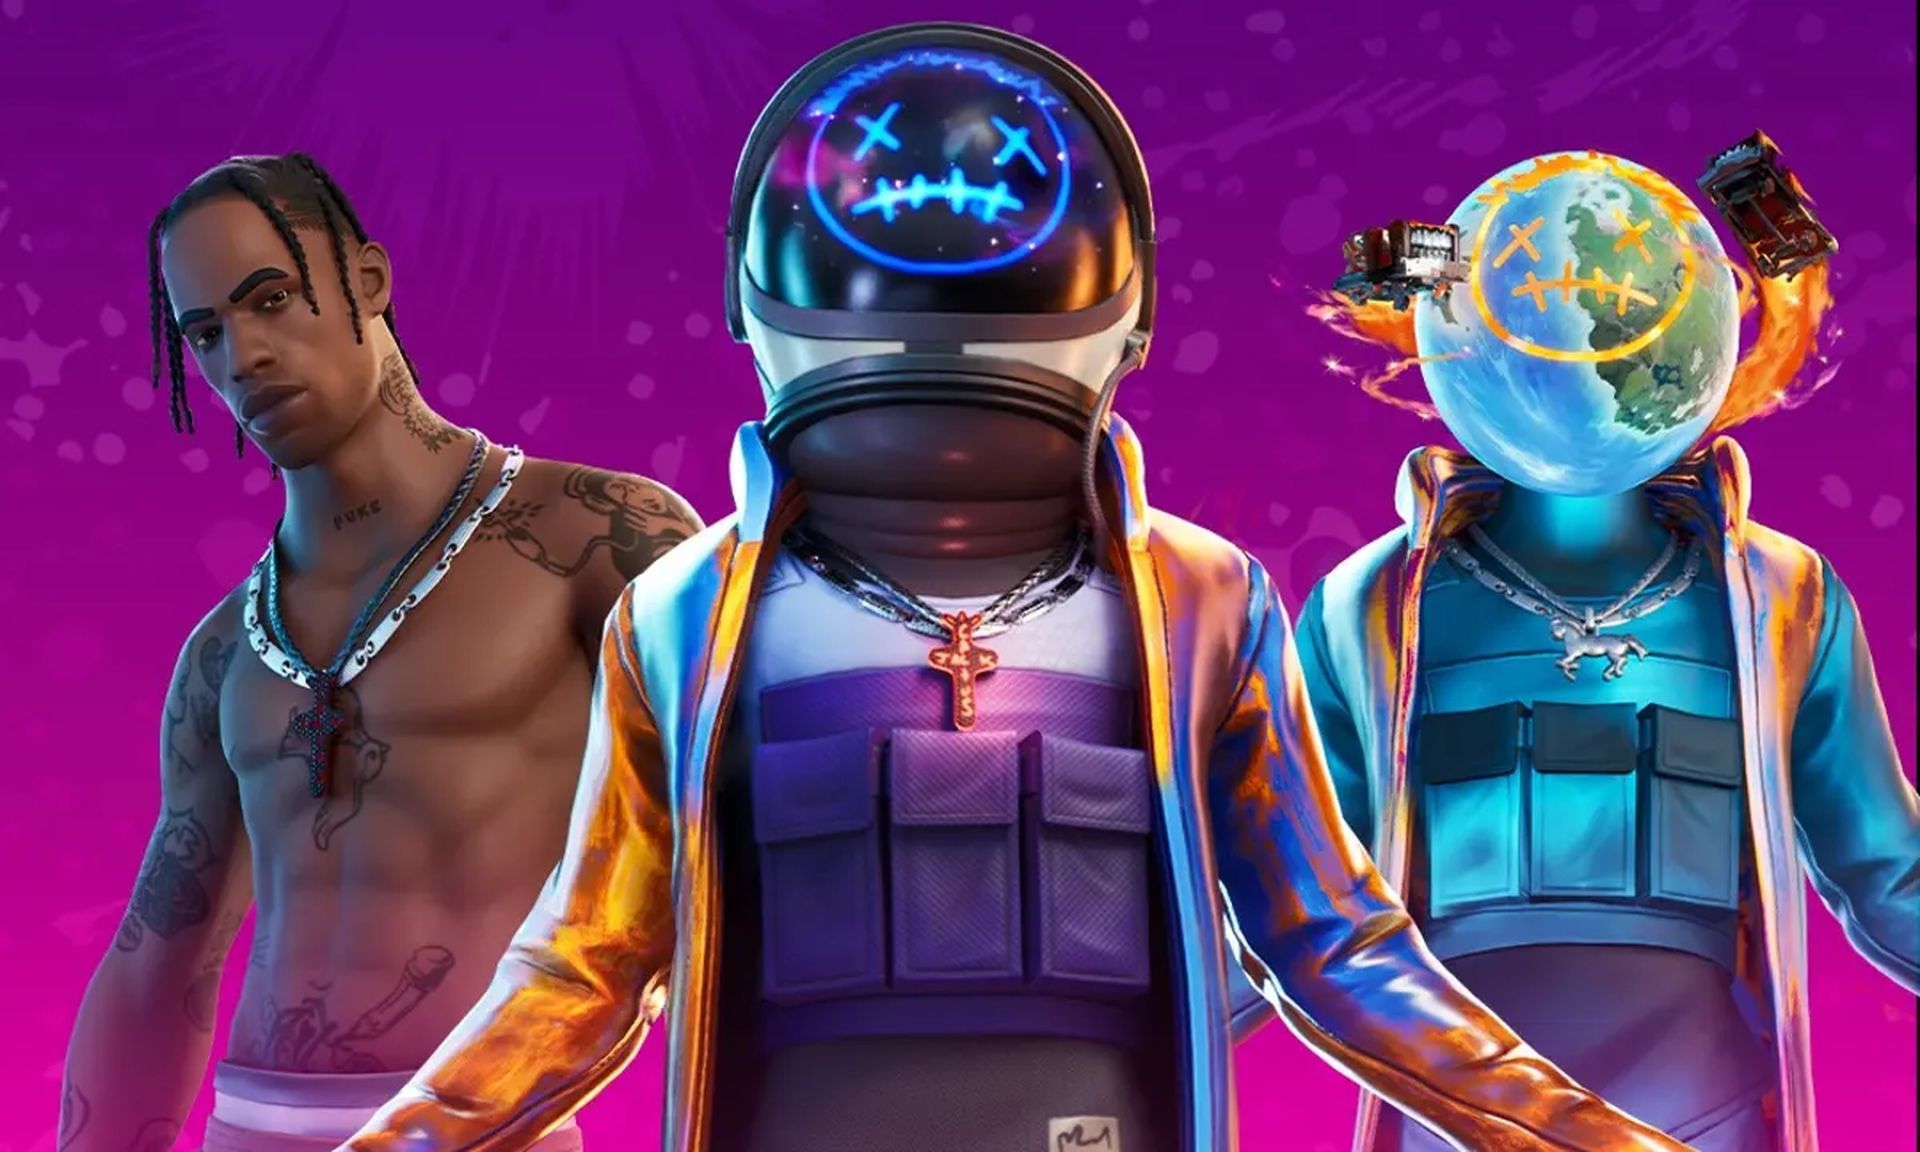 Fortnite no weekly quests: Why Fortnite weekly quests disappeared?